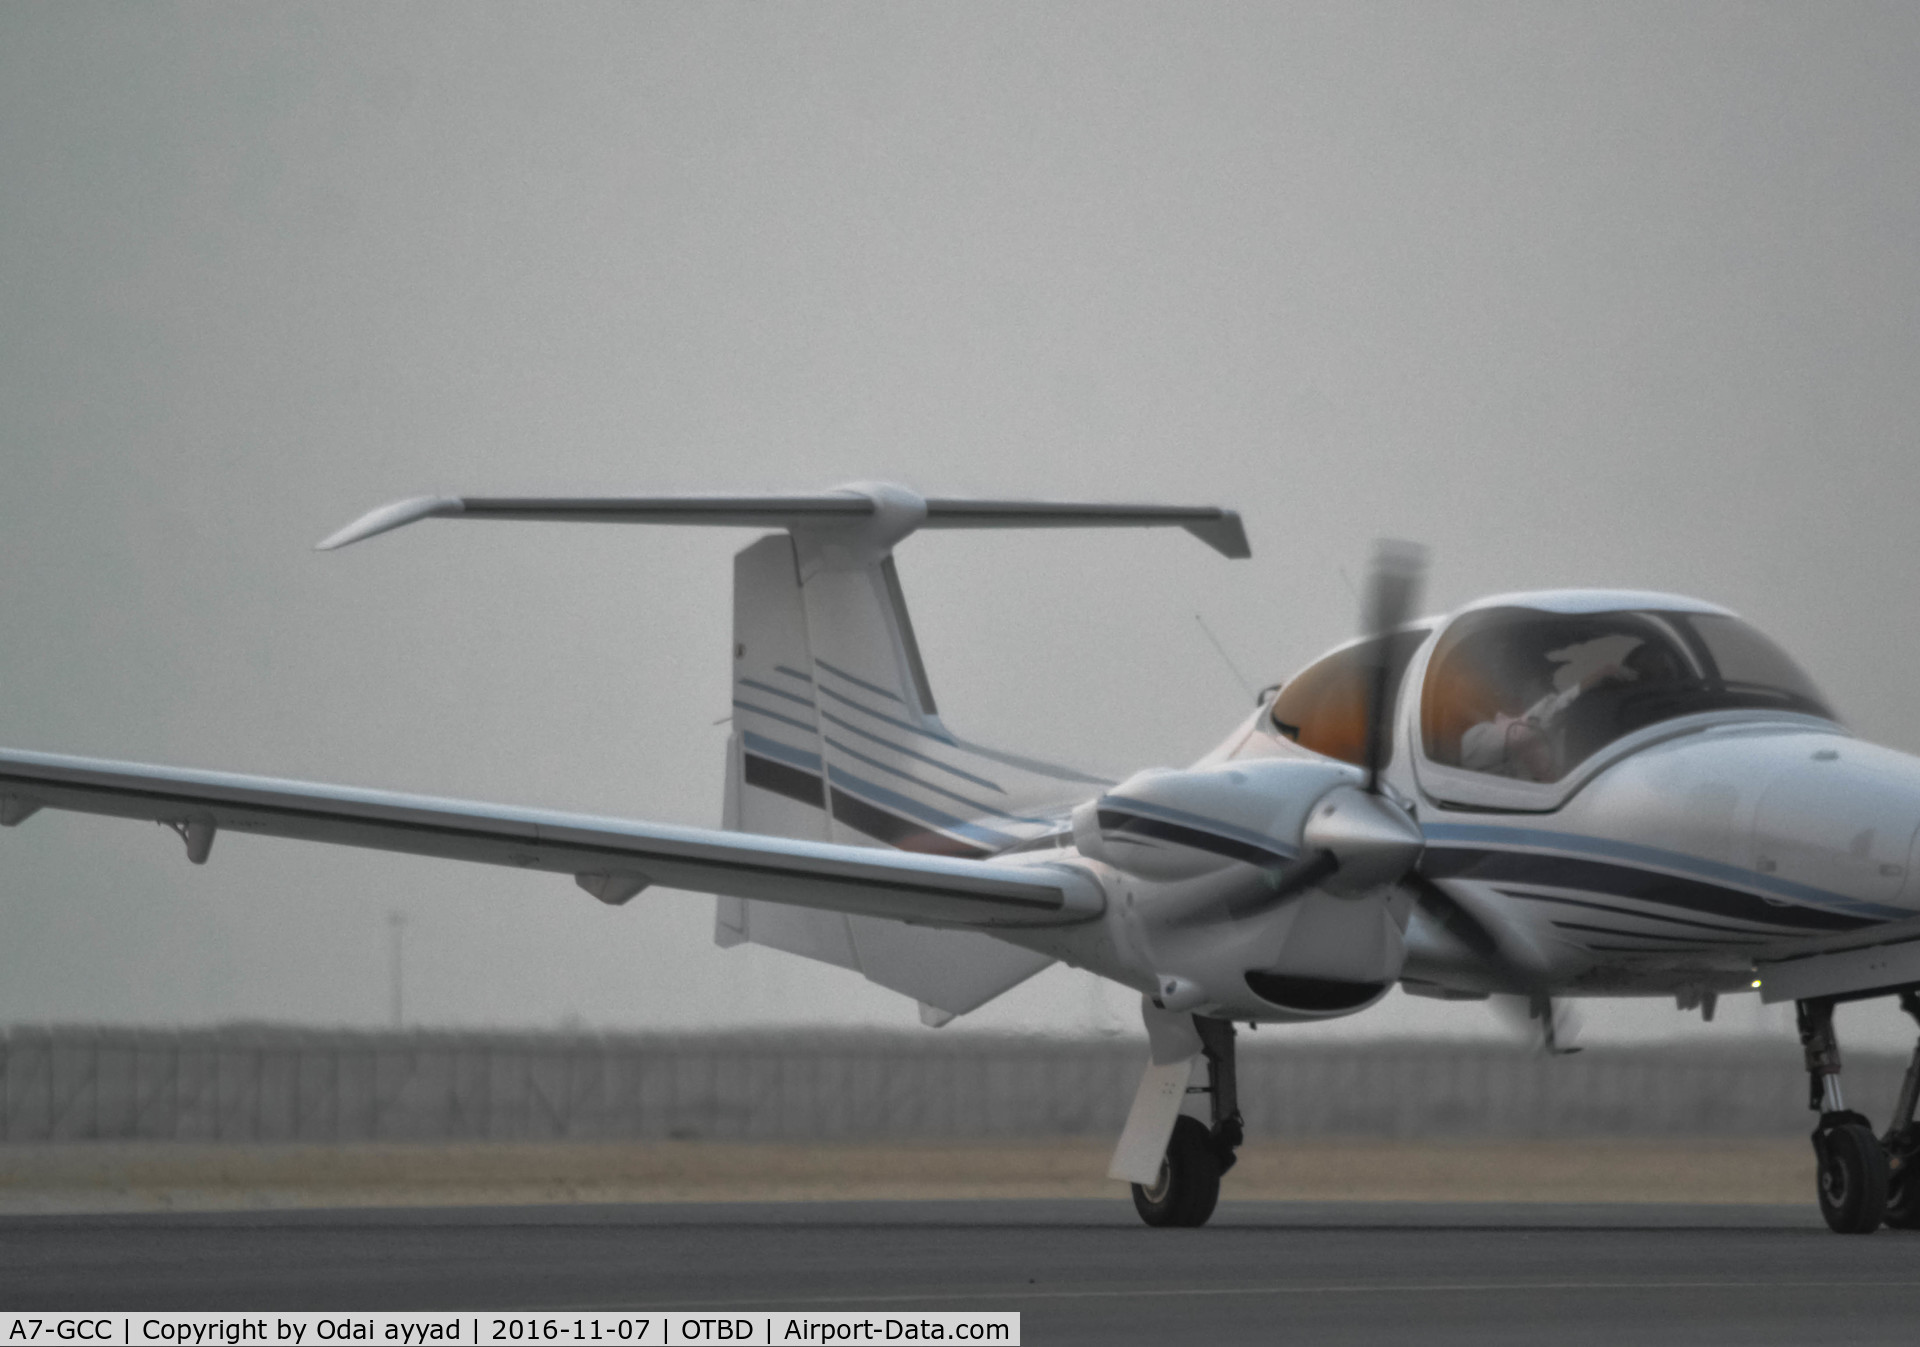 A7-GCC, 2014 Diamond DA-42 VI Twin Star C/N 42.N187, DA42 VI in a wonderful day in Al Khor Airport after landing